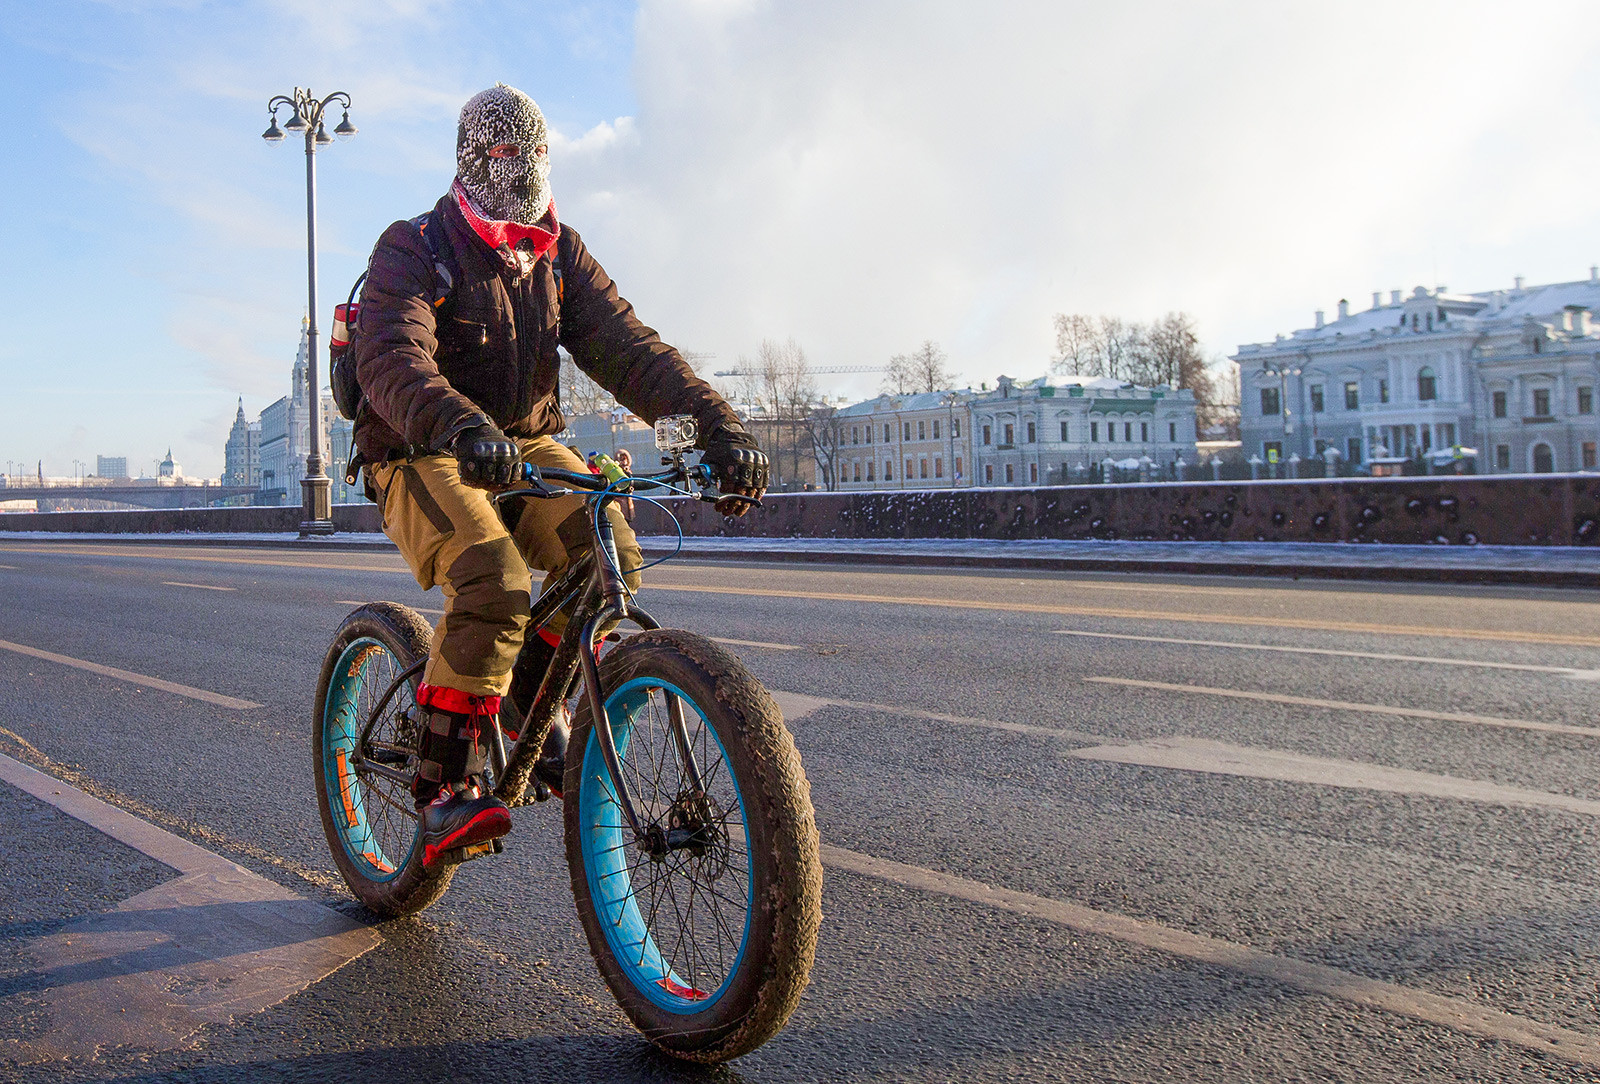 There are bike enthusiasts in Russia that prefer this transport even in winter but it's risky.